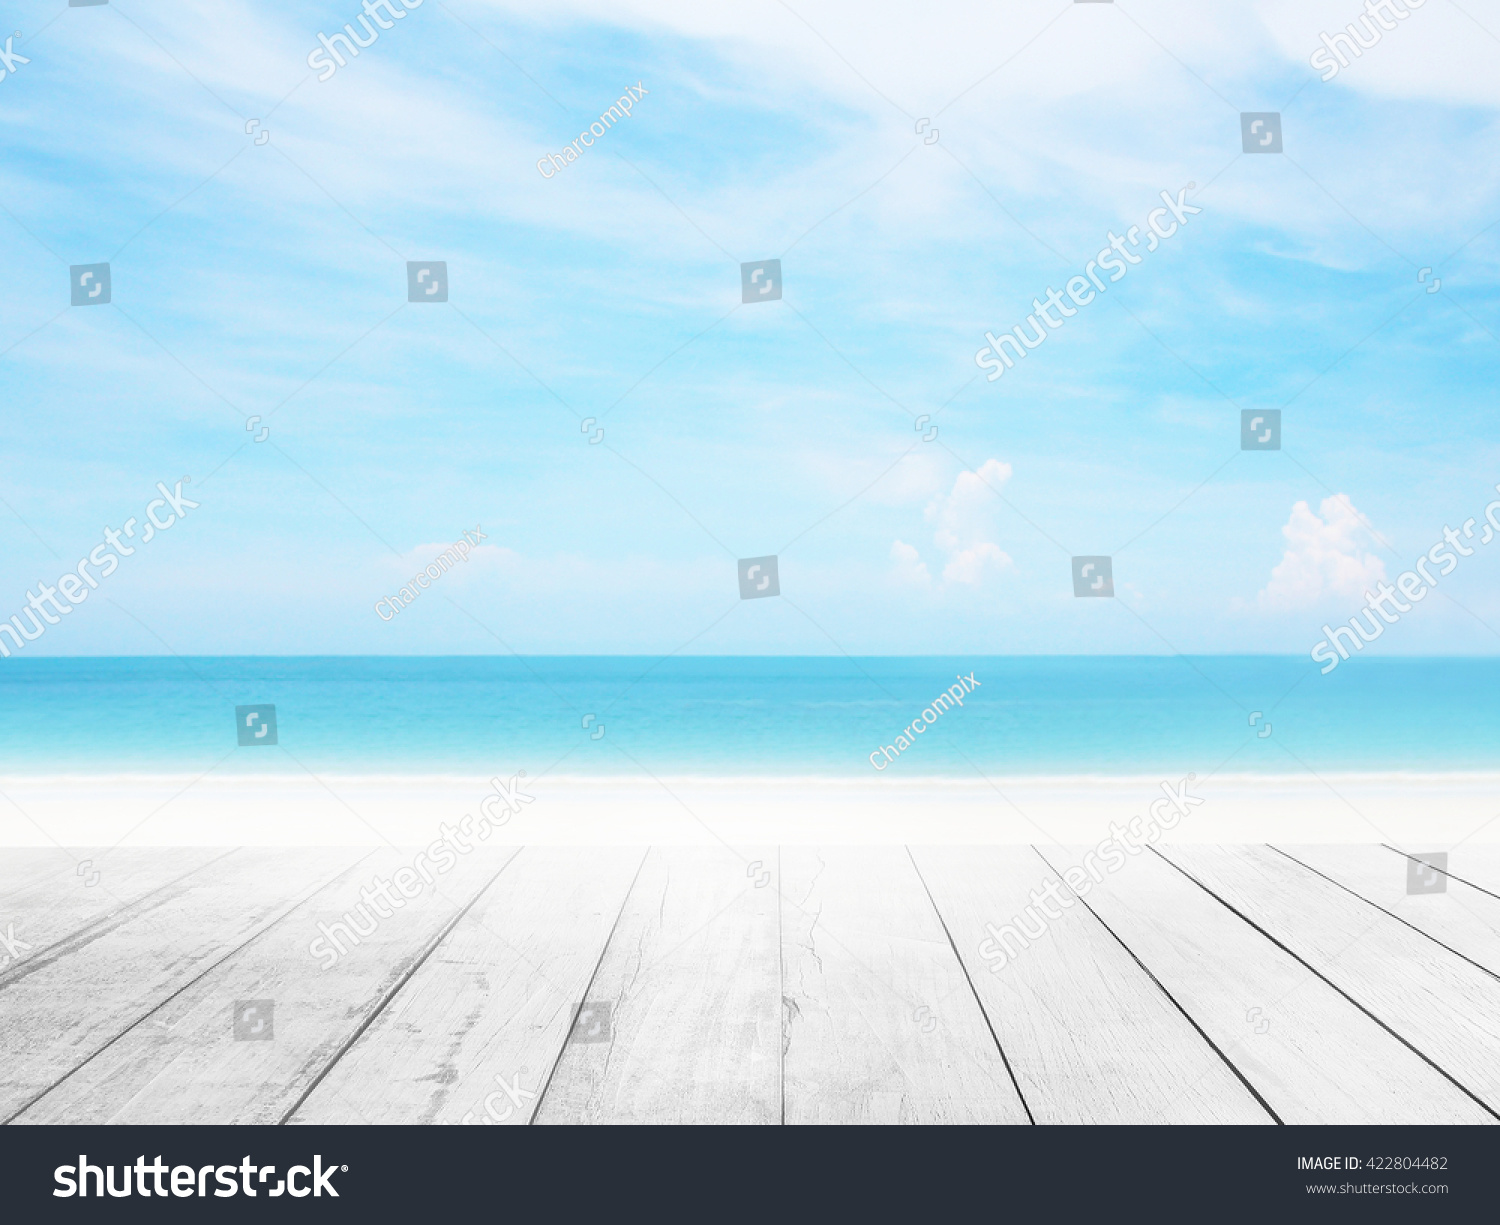 The blur cool sea background with wood floor foreground on horizon tropical sandy beach; relaxing outdoors vacation with heavenly mind view at a resort deck touching sunshine, sky surf summer clouds. #422804482